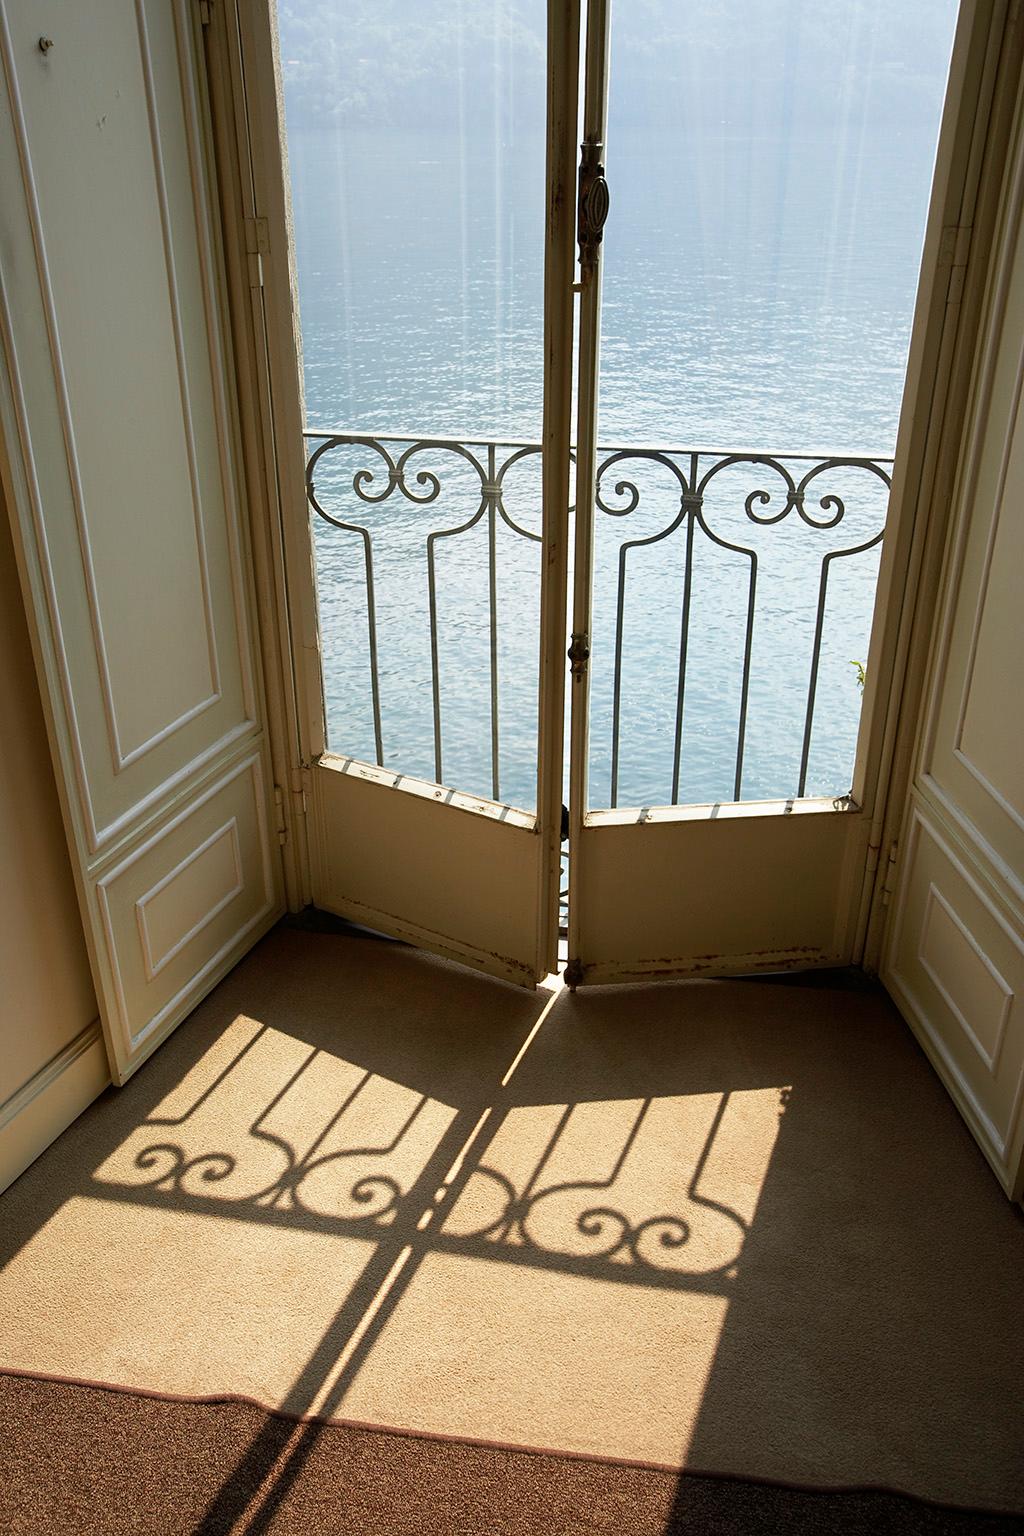 Verano Window, Verano, Italy, 2006. Archival Pigment Print. 30″ x 40”,  Edition of 7.
_________________________________________________________________________________________
Signed, Dated and Numbered.

George Simhoni is known for his visual